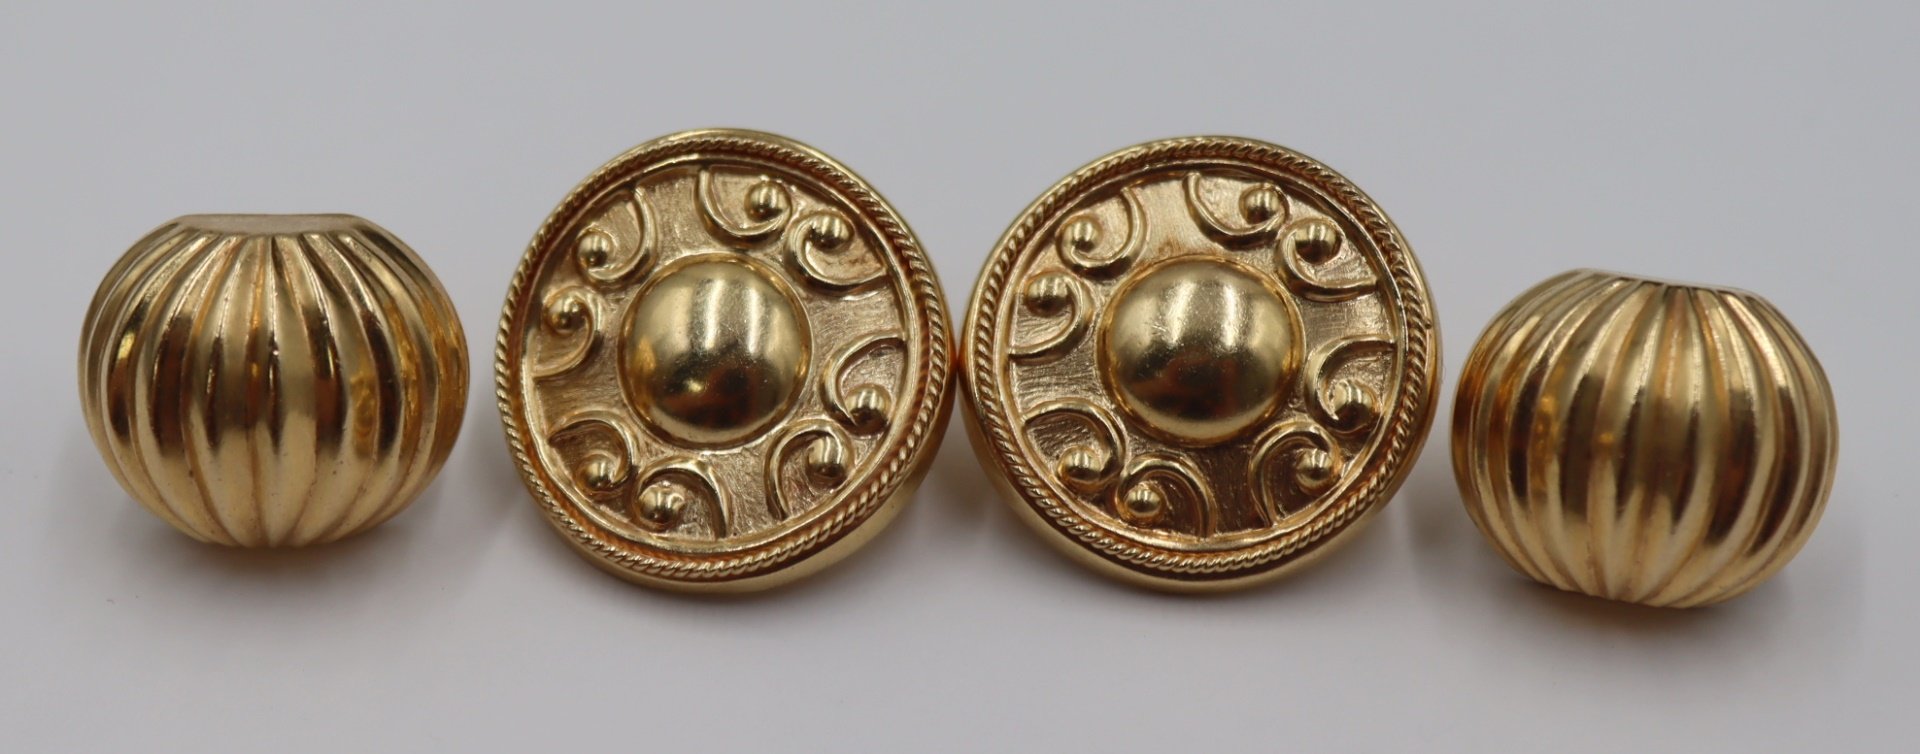 JEWELRY. (2) PAIRS OF 14KT GOLD